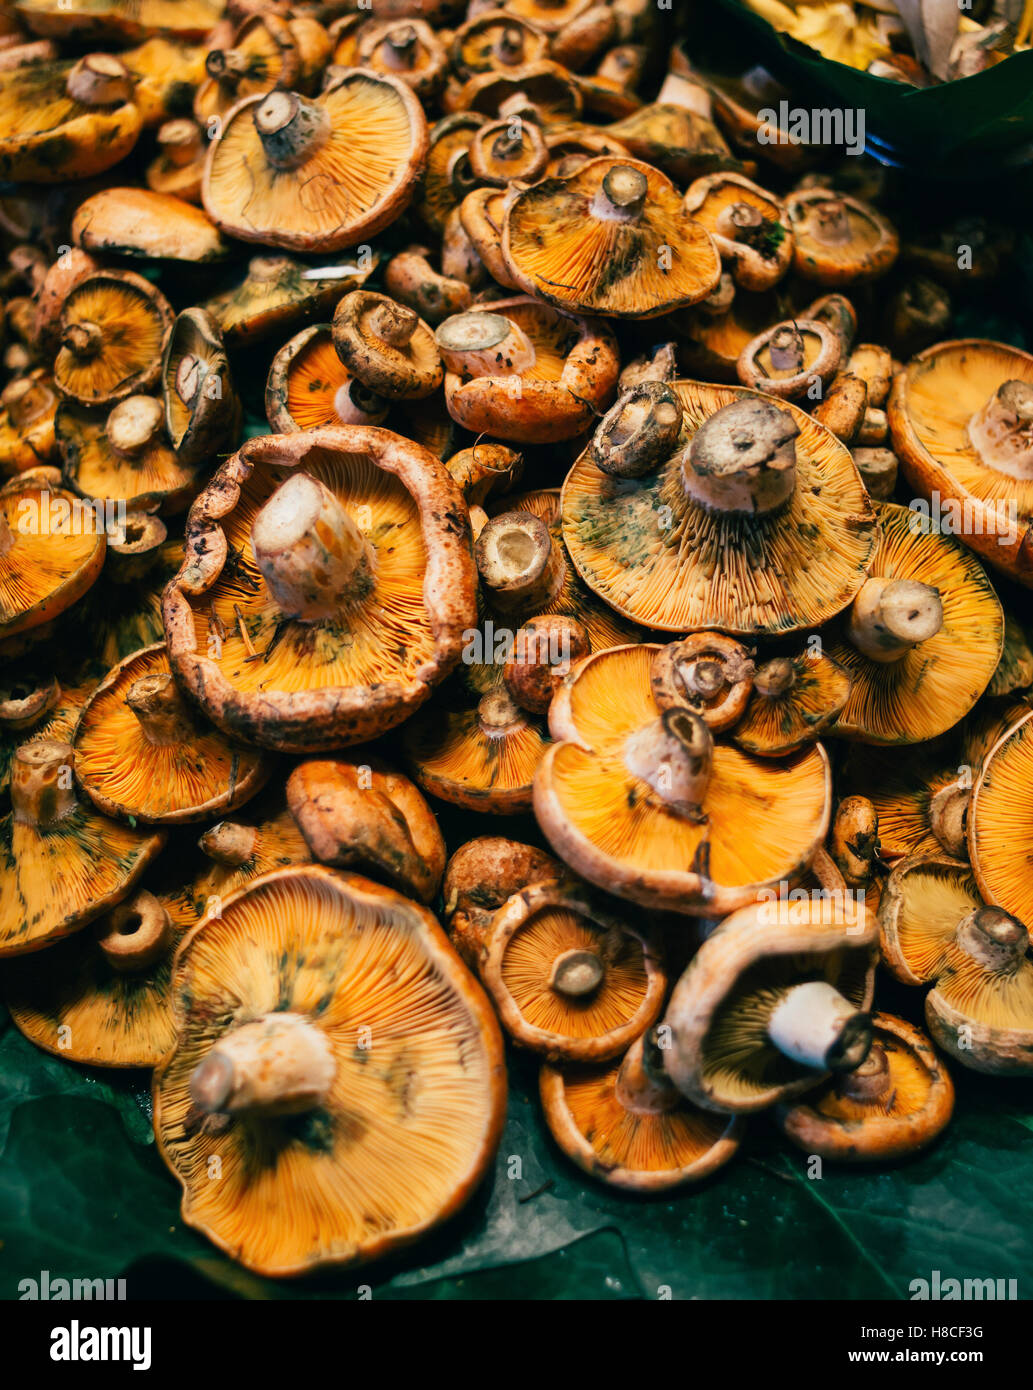 A pile of orange mushrooms for sale at a market. Stock Photo